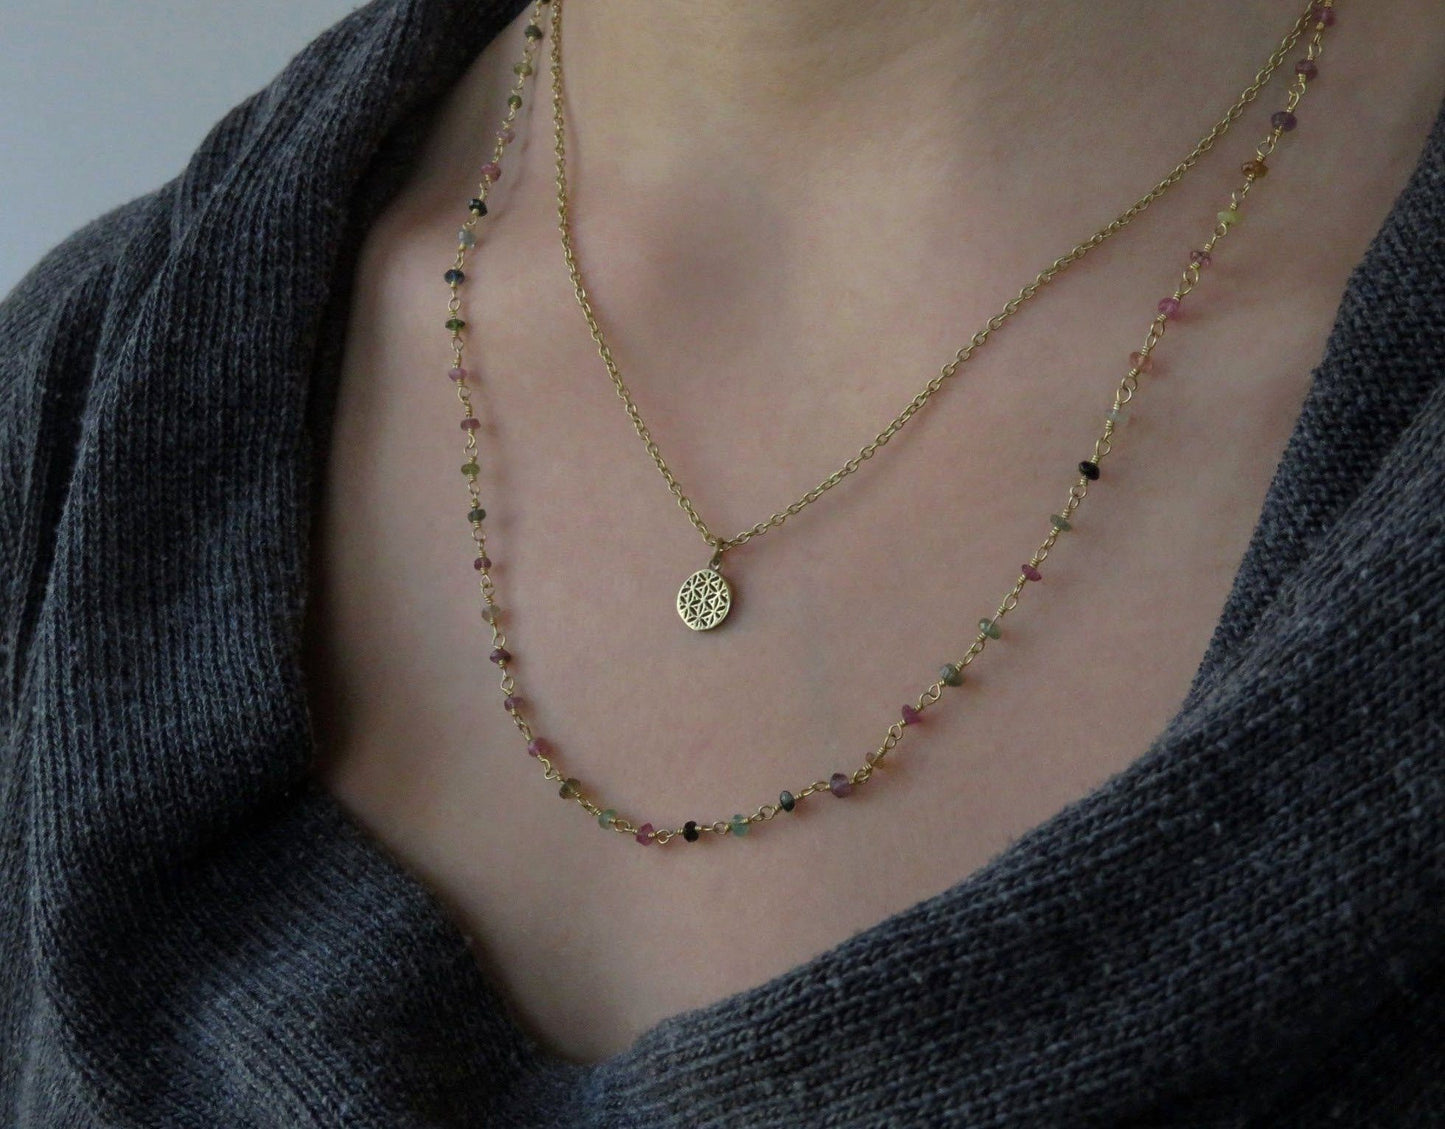 Brass necklace with small tourmaline stones and flowers 